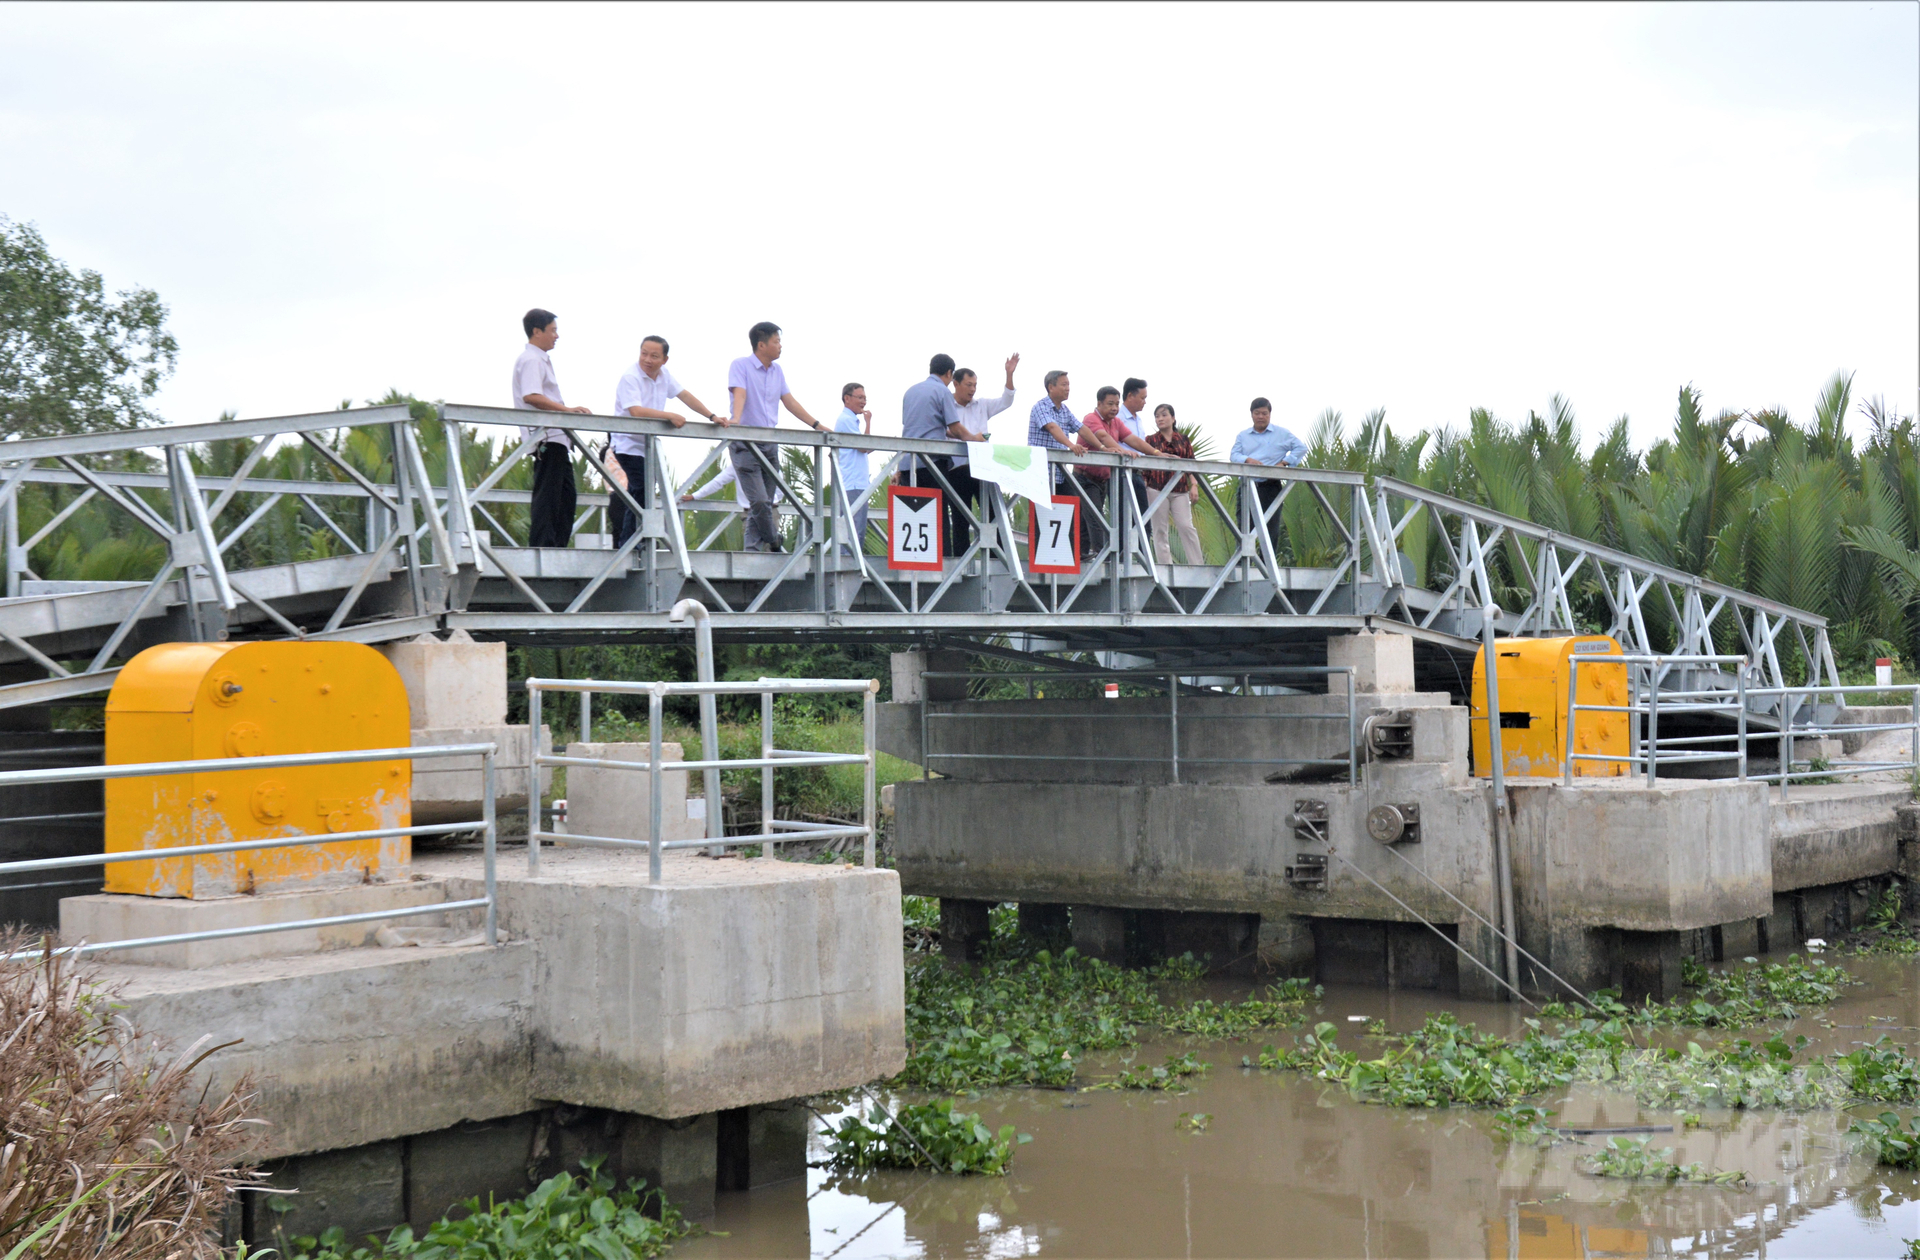 During the implementation process of VnSAT in Kien Giang, 22 cooperatives received infrastructure investment. Photo: Trung Chanh.